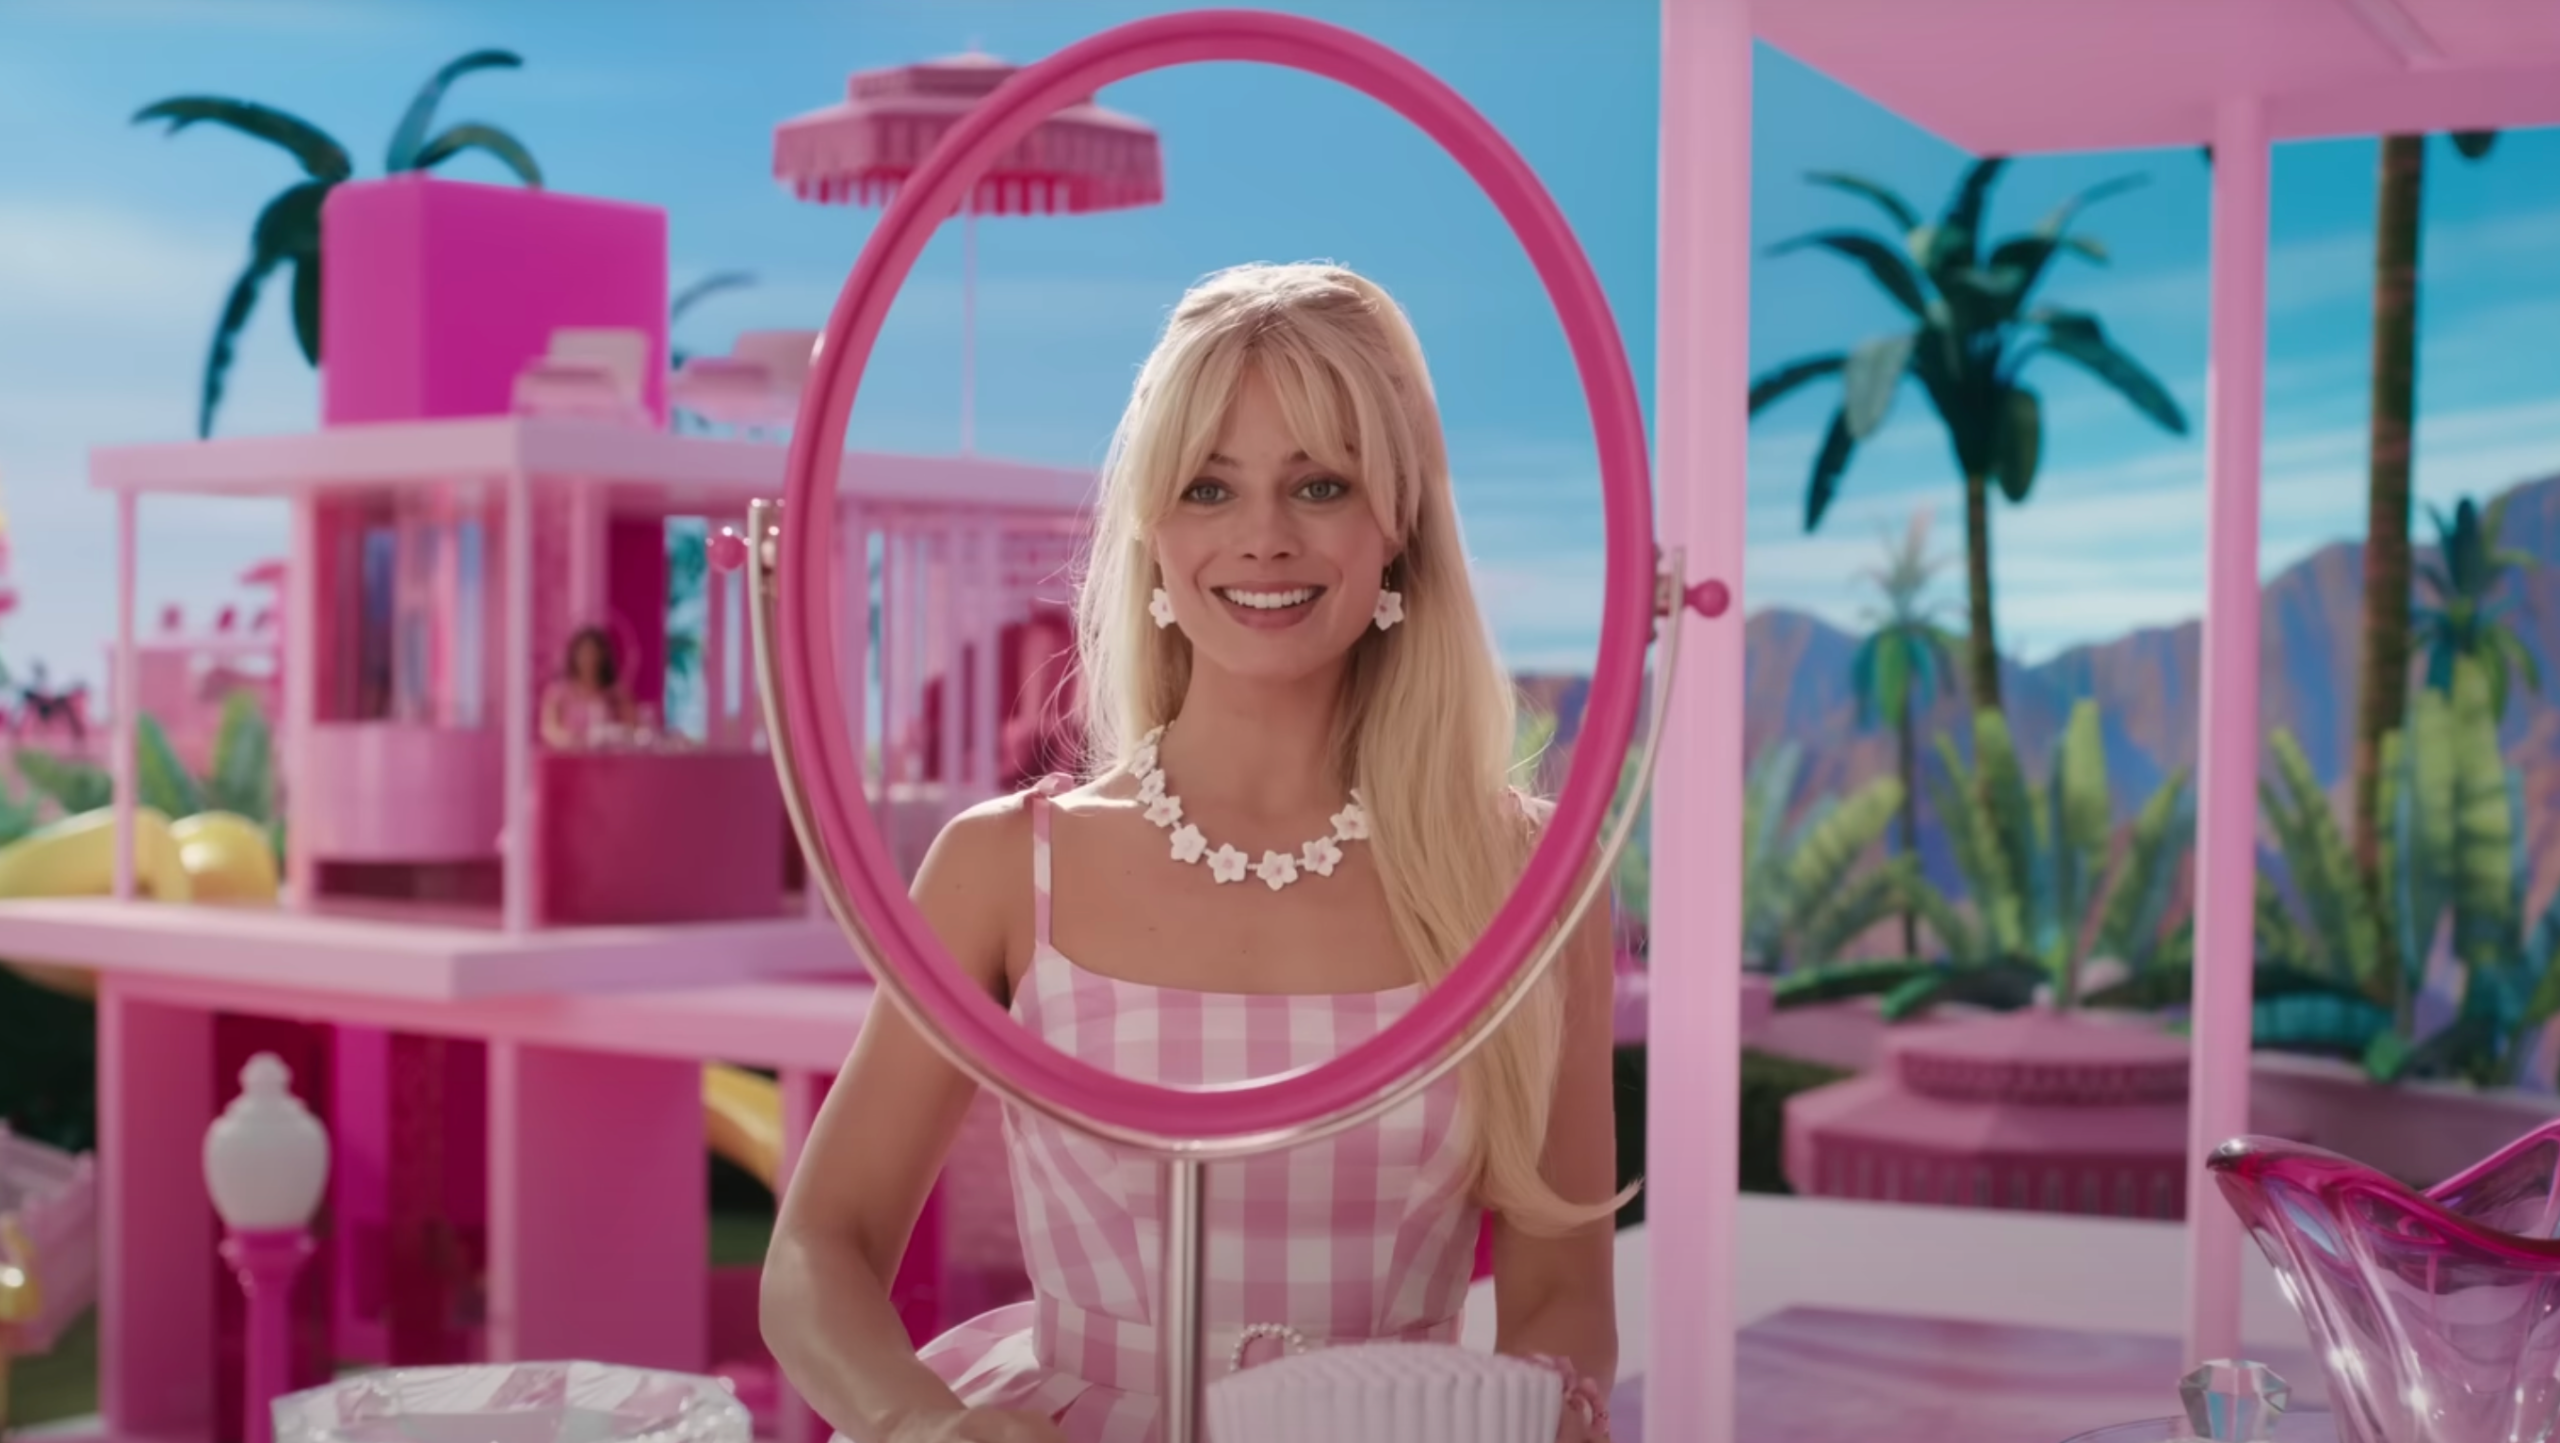 The "Barbie" trailer is jam-packed with joy. 1